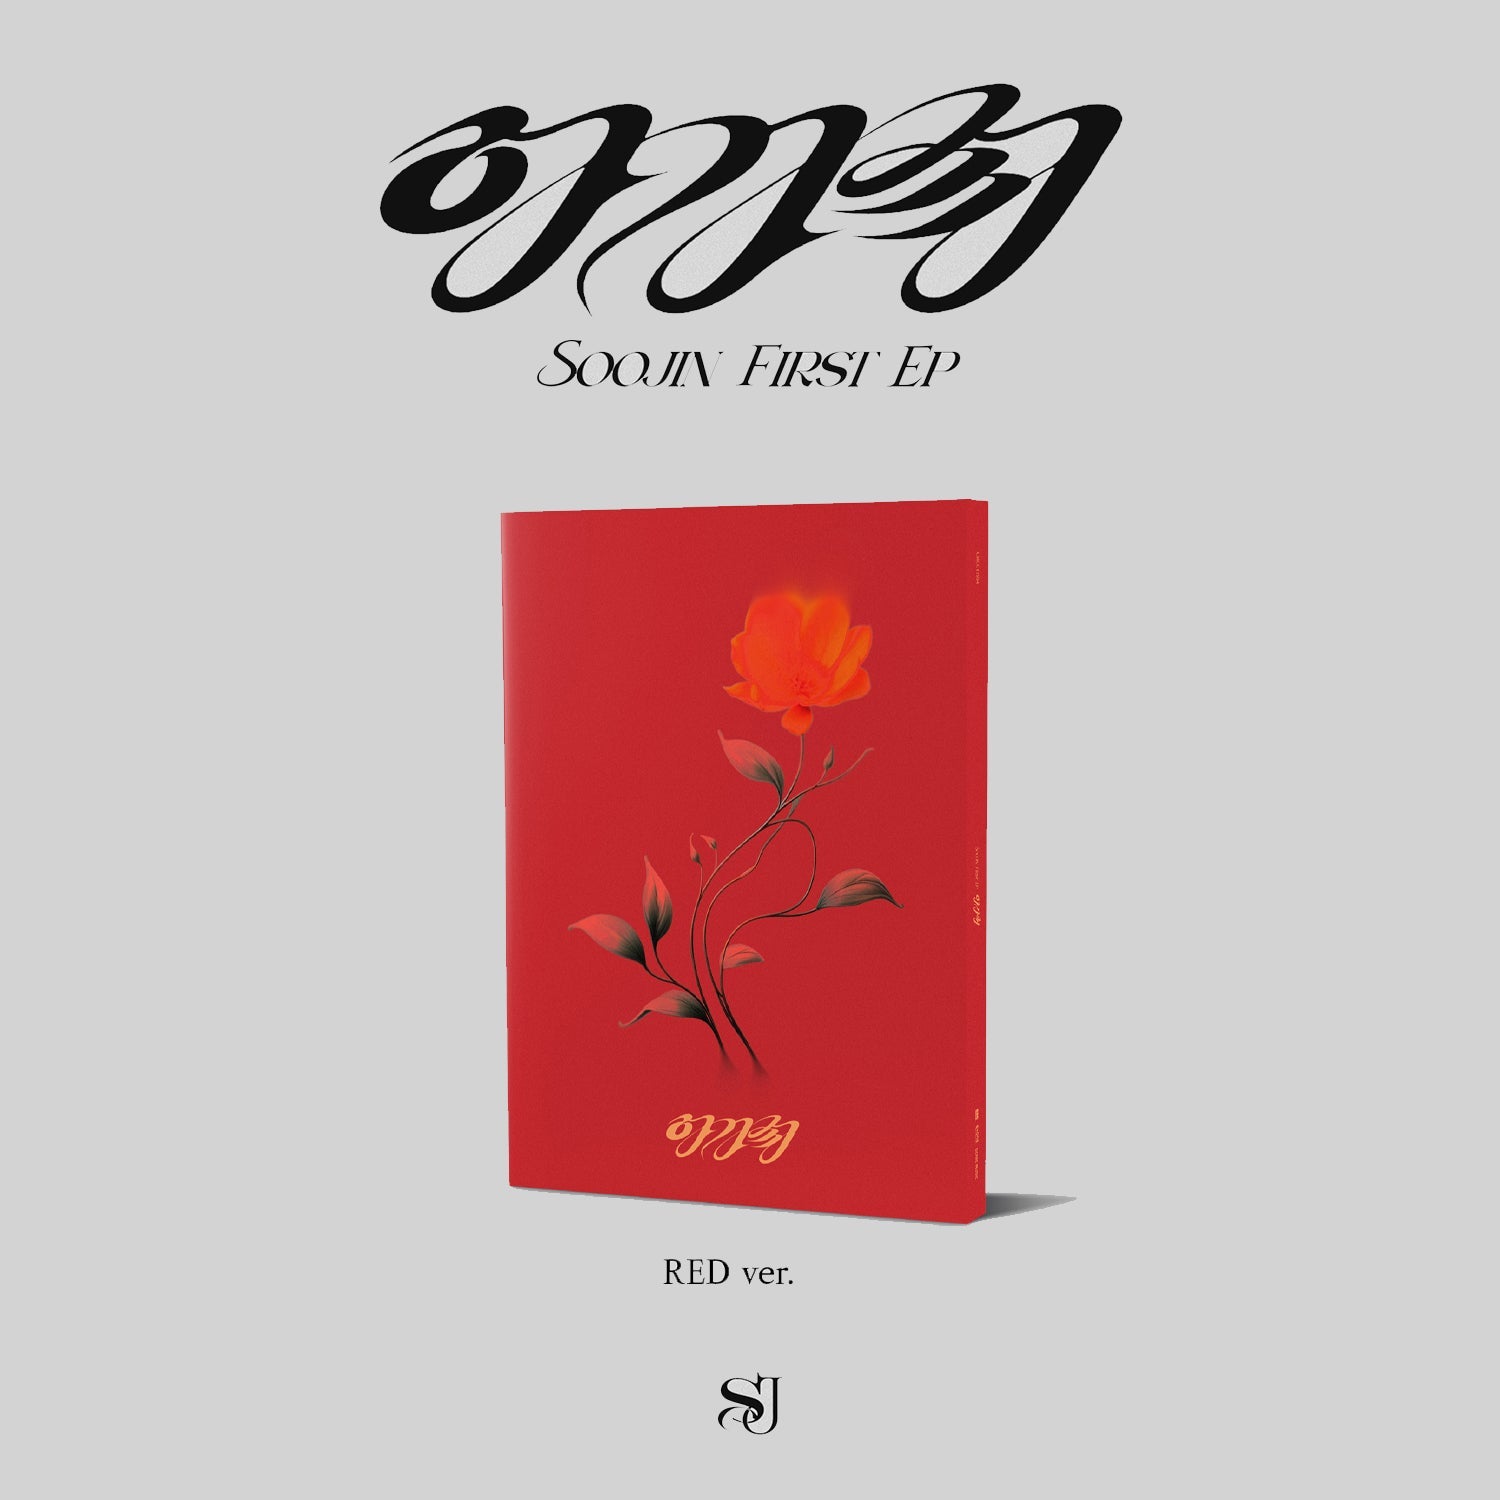 SOOJIN 1ST EP ALBUM 'AGASSY' RED VERSION COVER